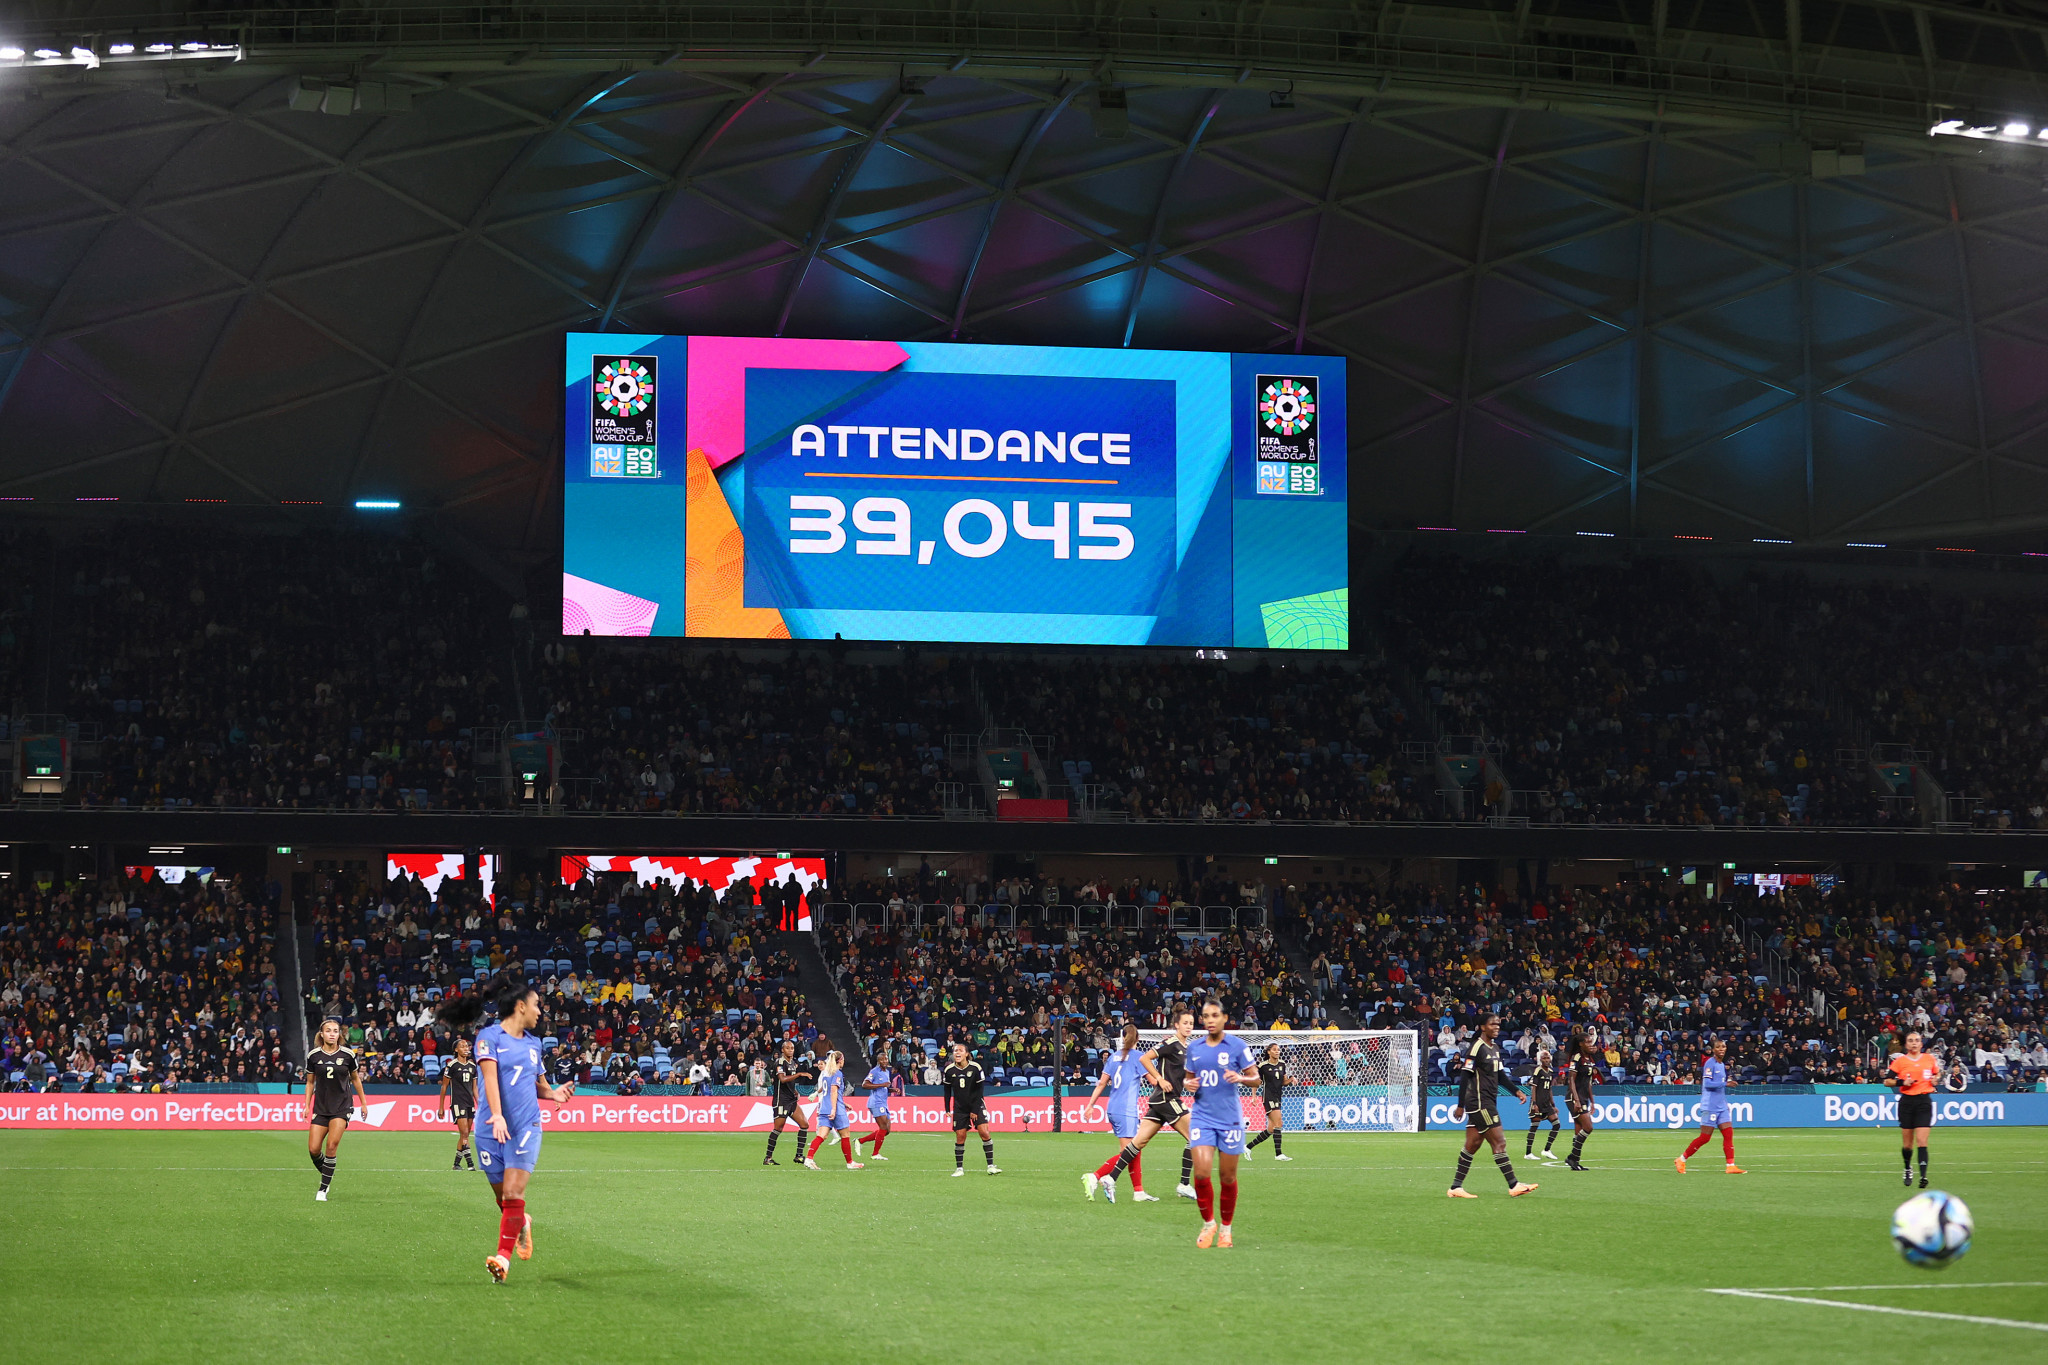 More than 39,000 supporters watched the Group F opener between France and Jamaica at the Sydney Football Stadium ©Getty Images